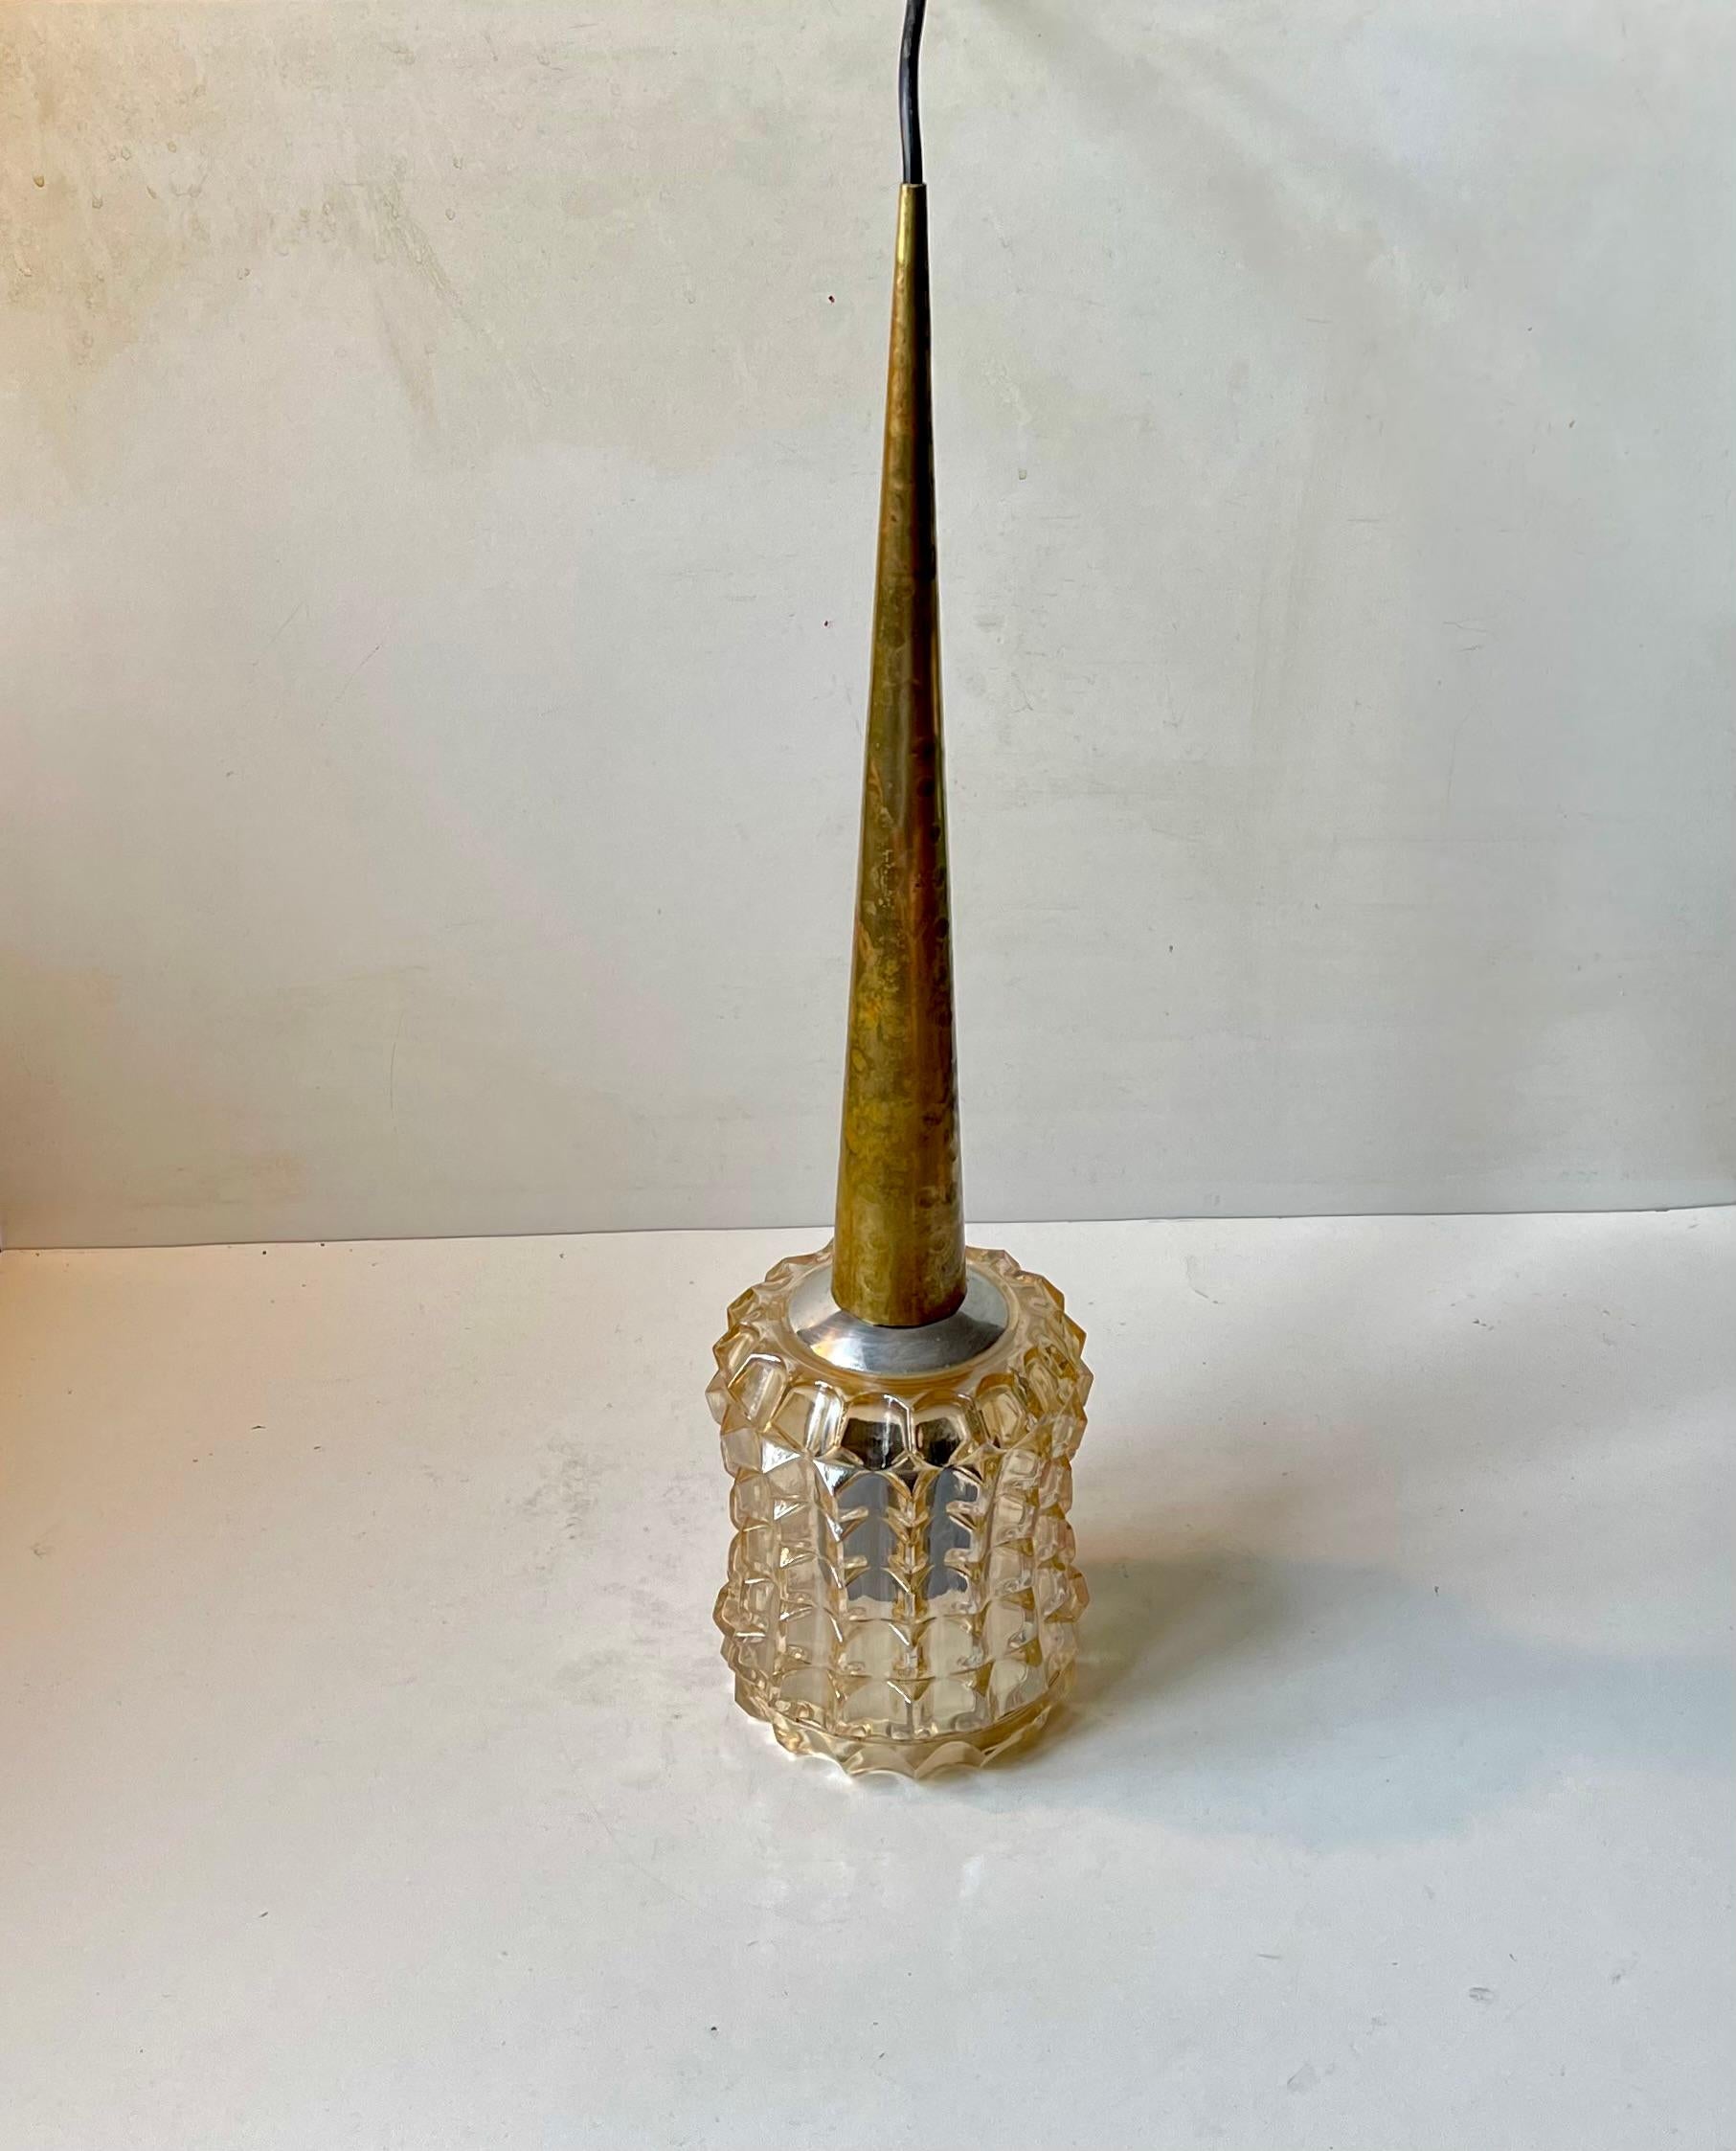 Tall and spiky hanging light featuring a lightly hammered brass top and a pressed smoke glass shade. Anonymously manufactured in Scandinavia during the 1960s. Measurements: H: 50 cm, Diameter: 13 cm. Working and tested vintage order. Comes installed